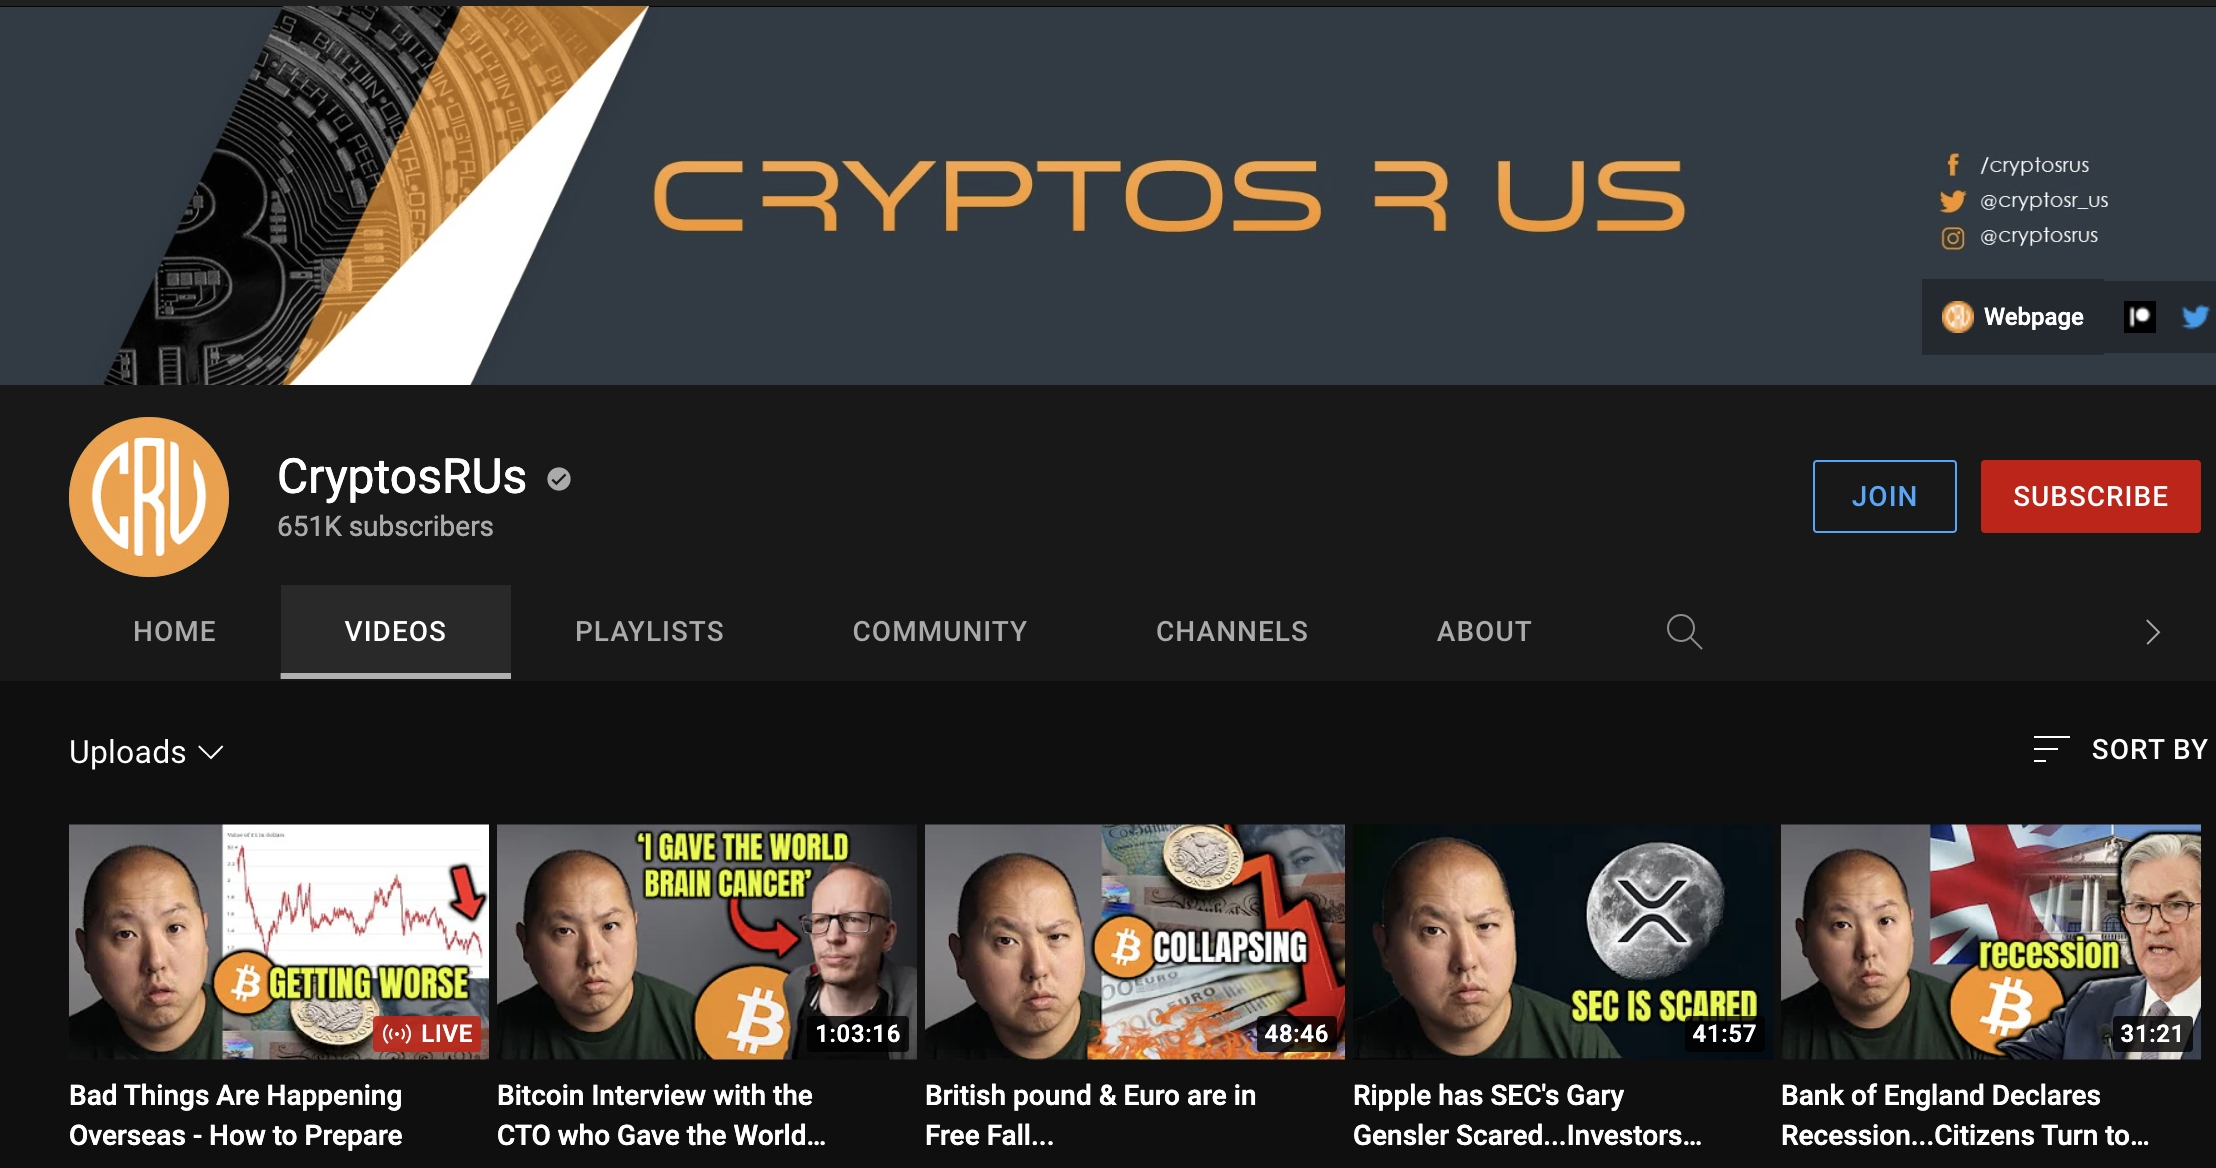 CryptosRUs YouTube channel